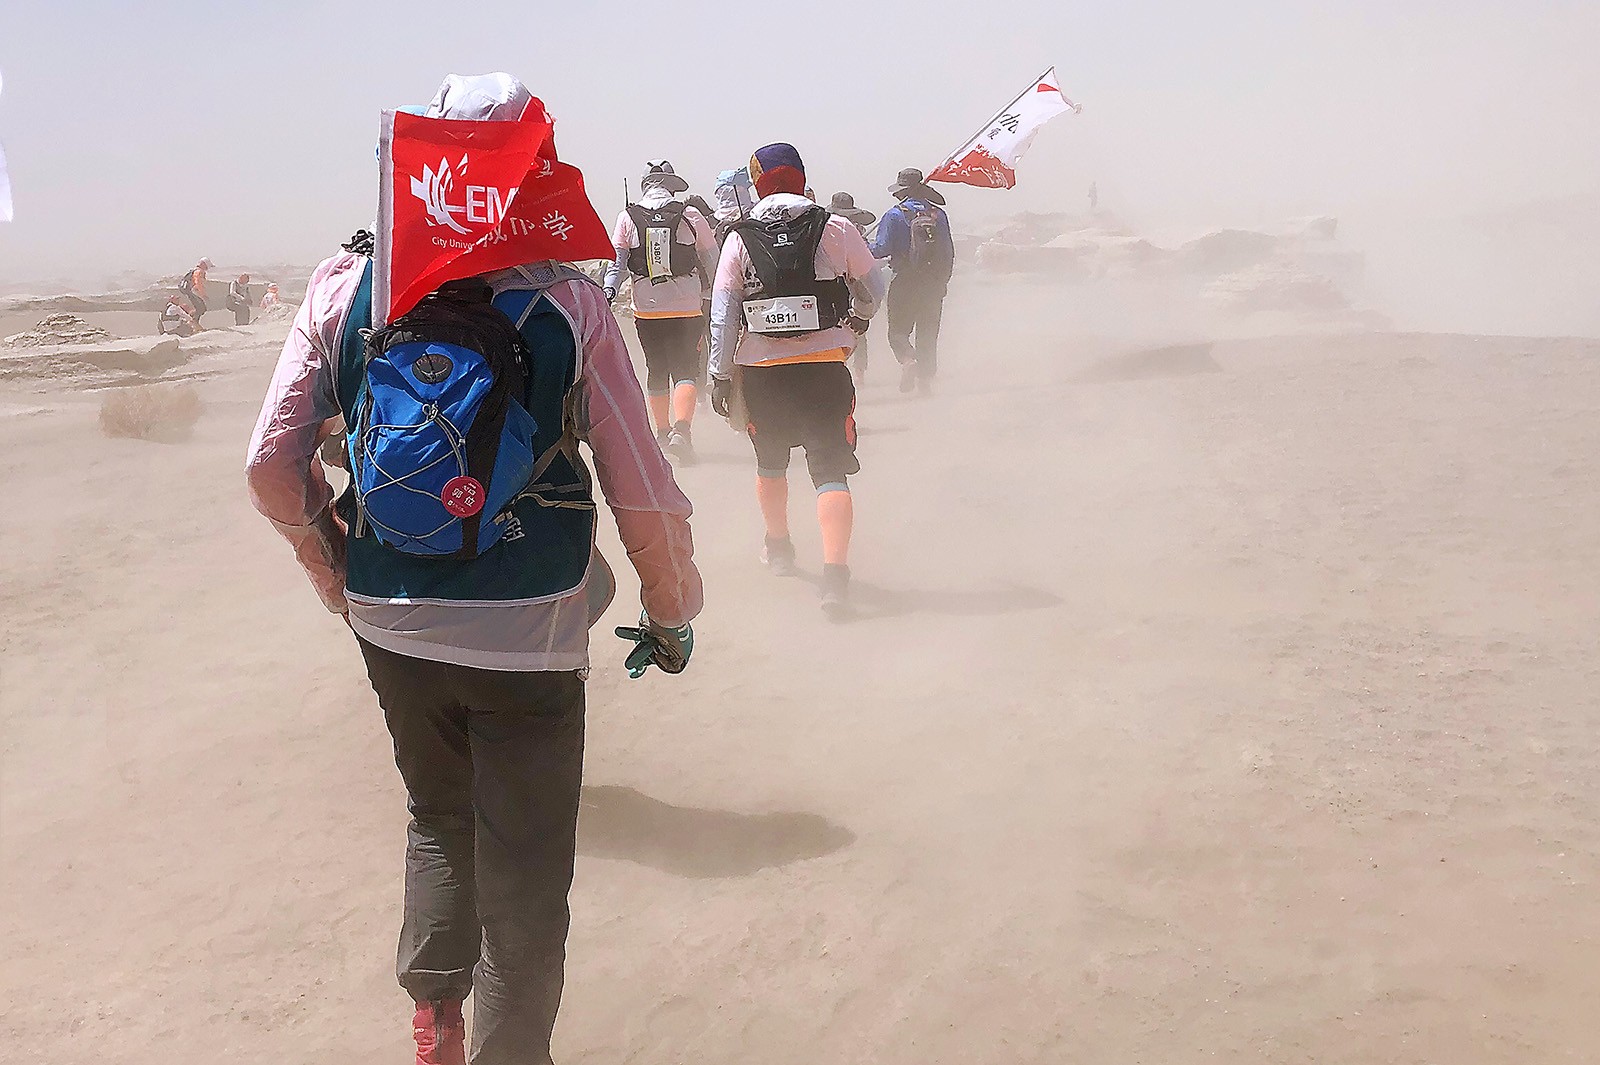 Sandstorms and poor visibility did not deter participants.